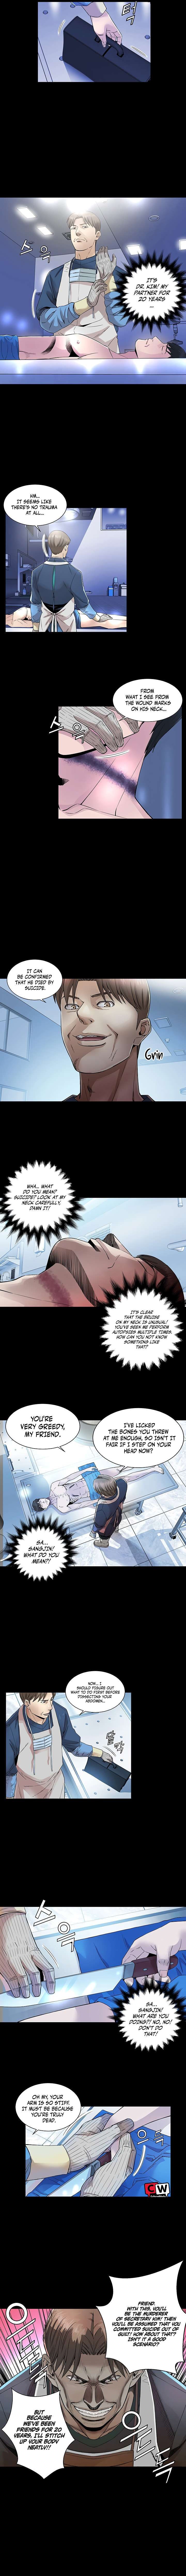 God of Autopsy Chapter 1 page 3